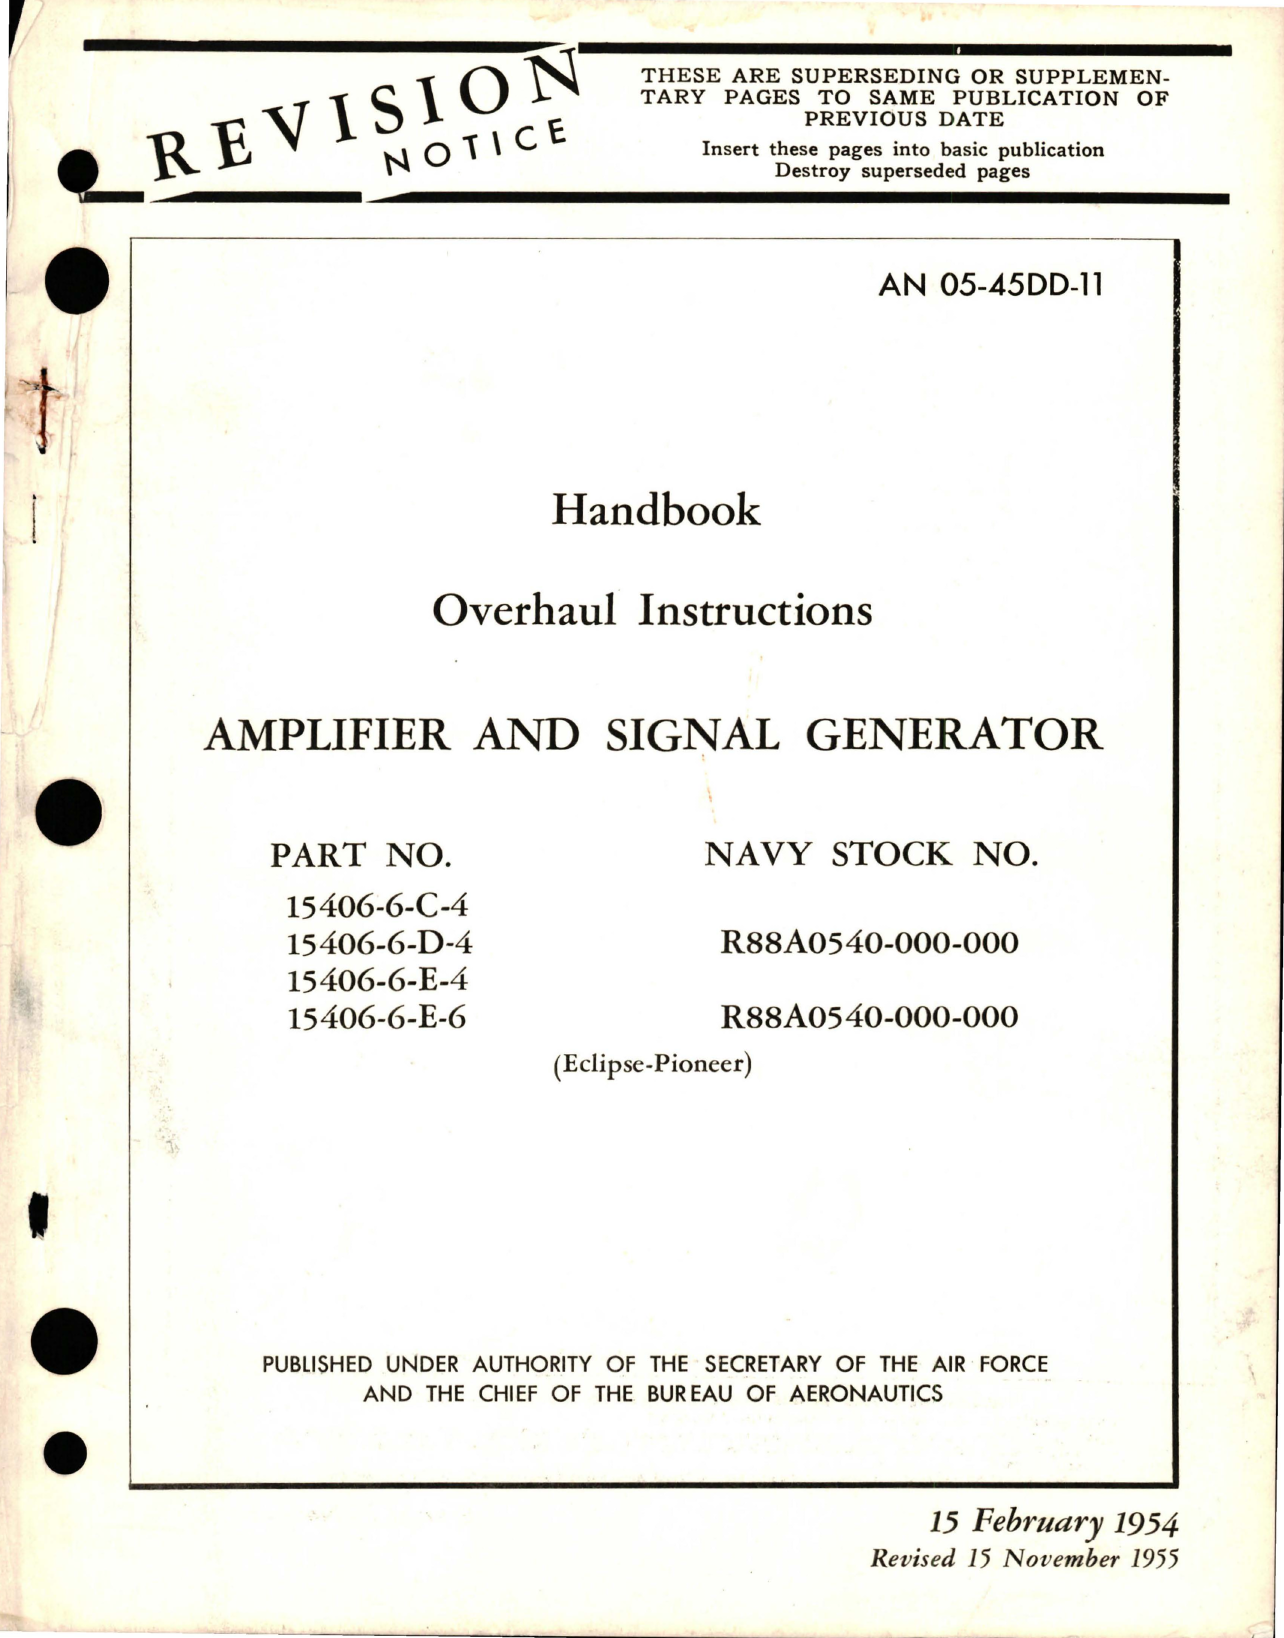 Sample page 1 from AirCorps Library document: Overhaul Instructions for Amplifier and Signal Generator - Parts 15406-6-C-4, 15406-6-D-4, 15406-6-E-4, and 15406-6-E-6